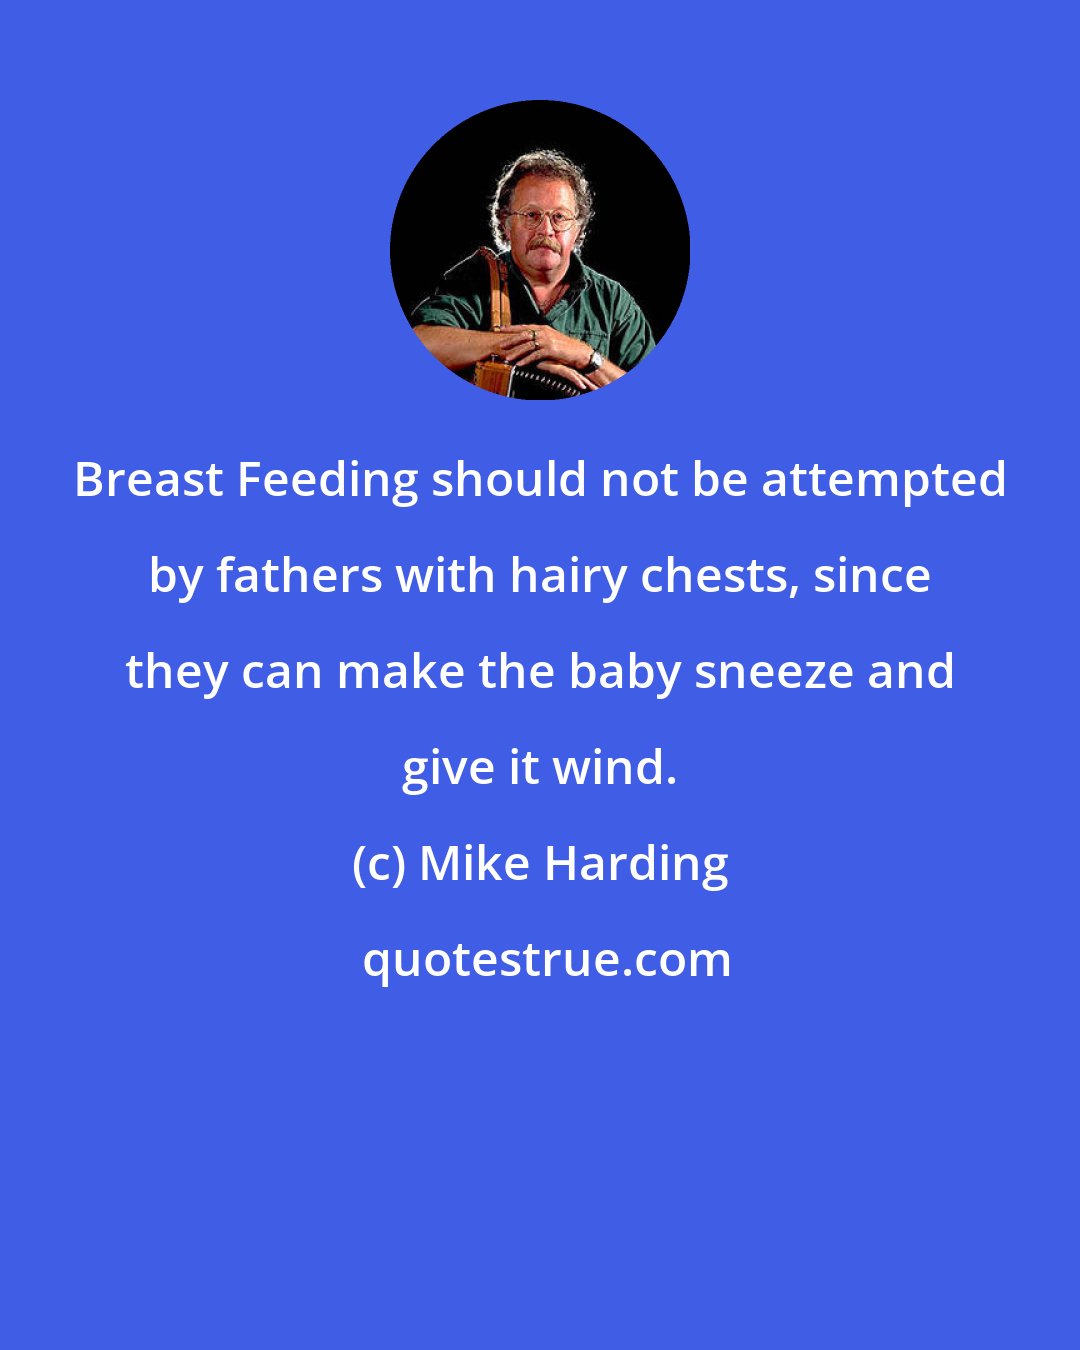 Mike Harding: Breast Feeding should not be attempted by fathers with hairy chests, since they can make the baby sneeze and give it wind.